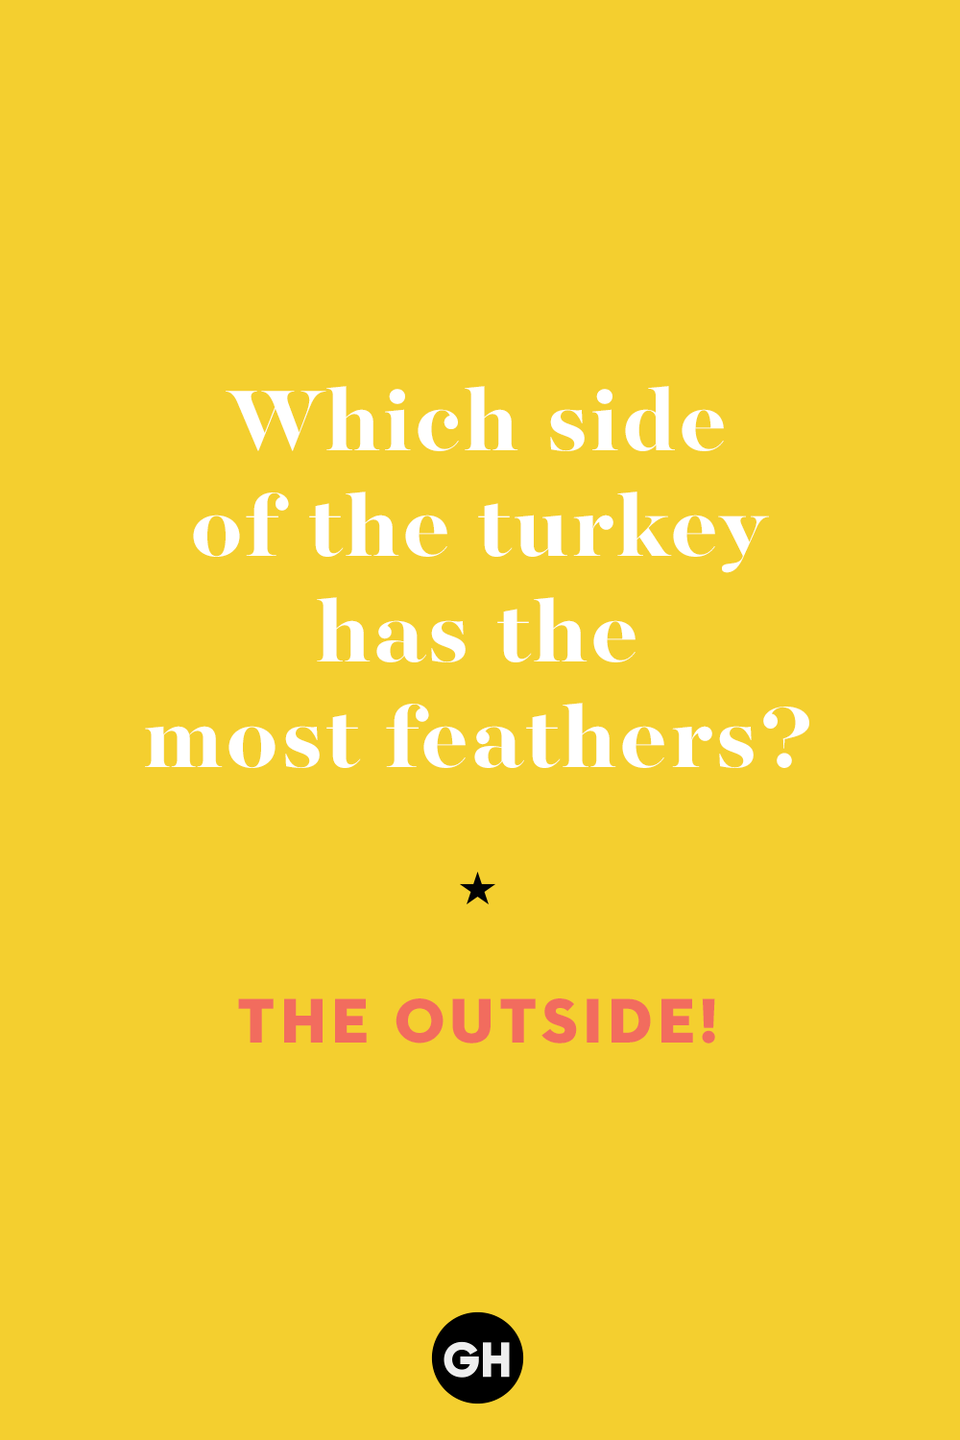 8) Which side of the turkey has the most feathers?